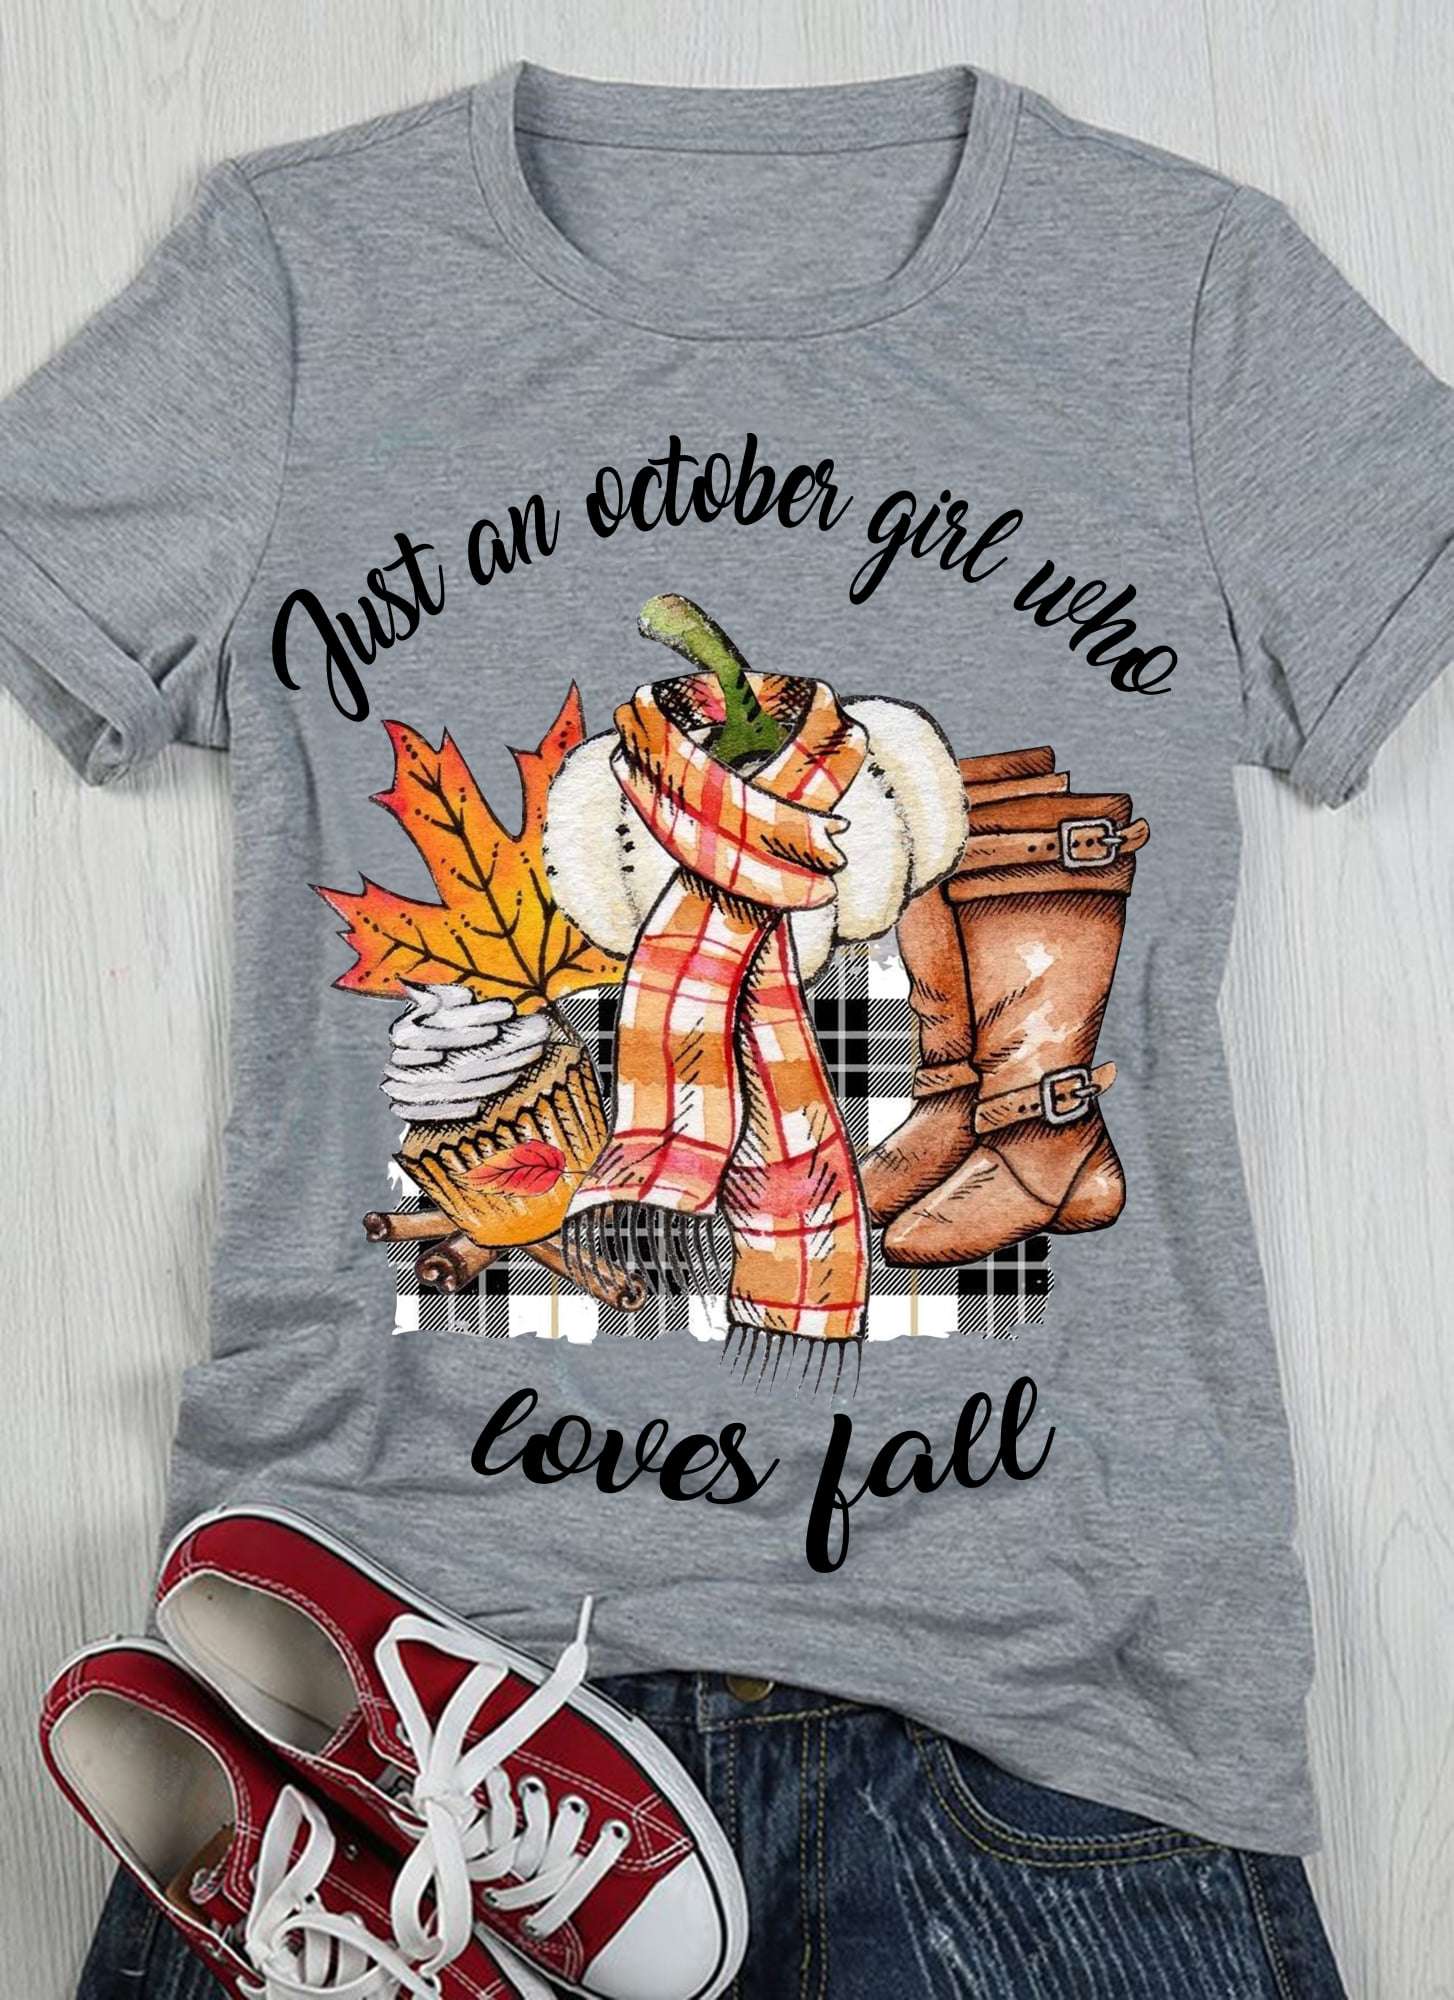 Just an october girl who loves fall - Fall the wonderful time, october fall girl